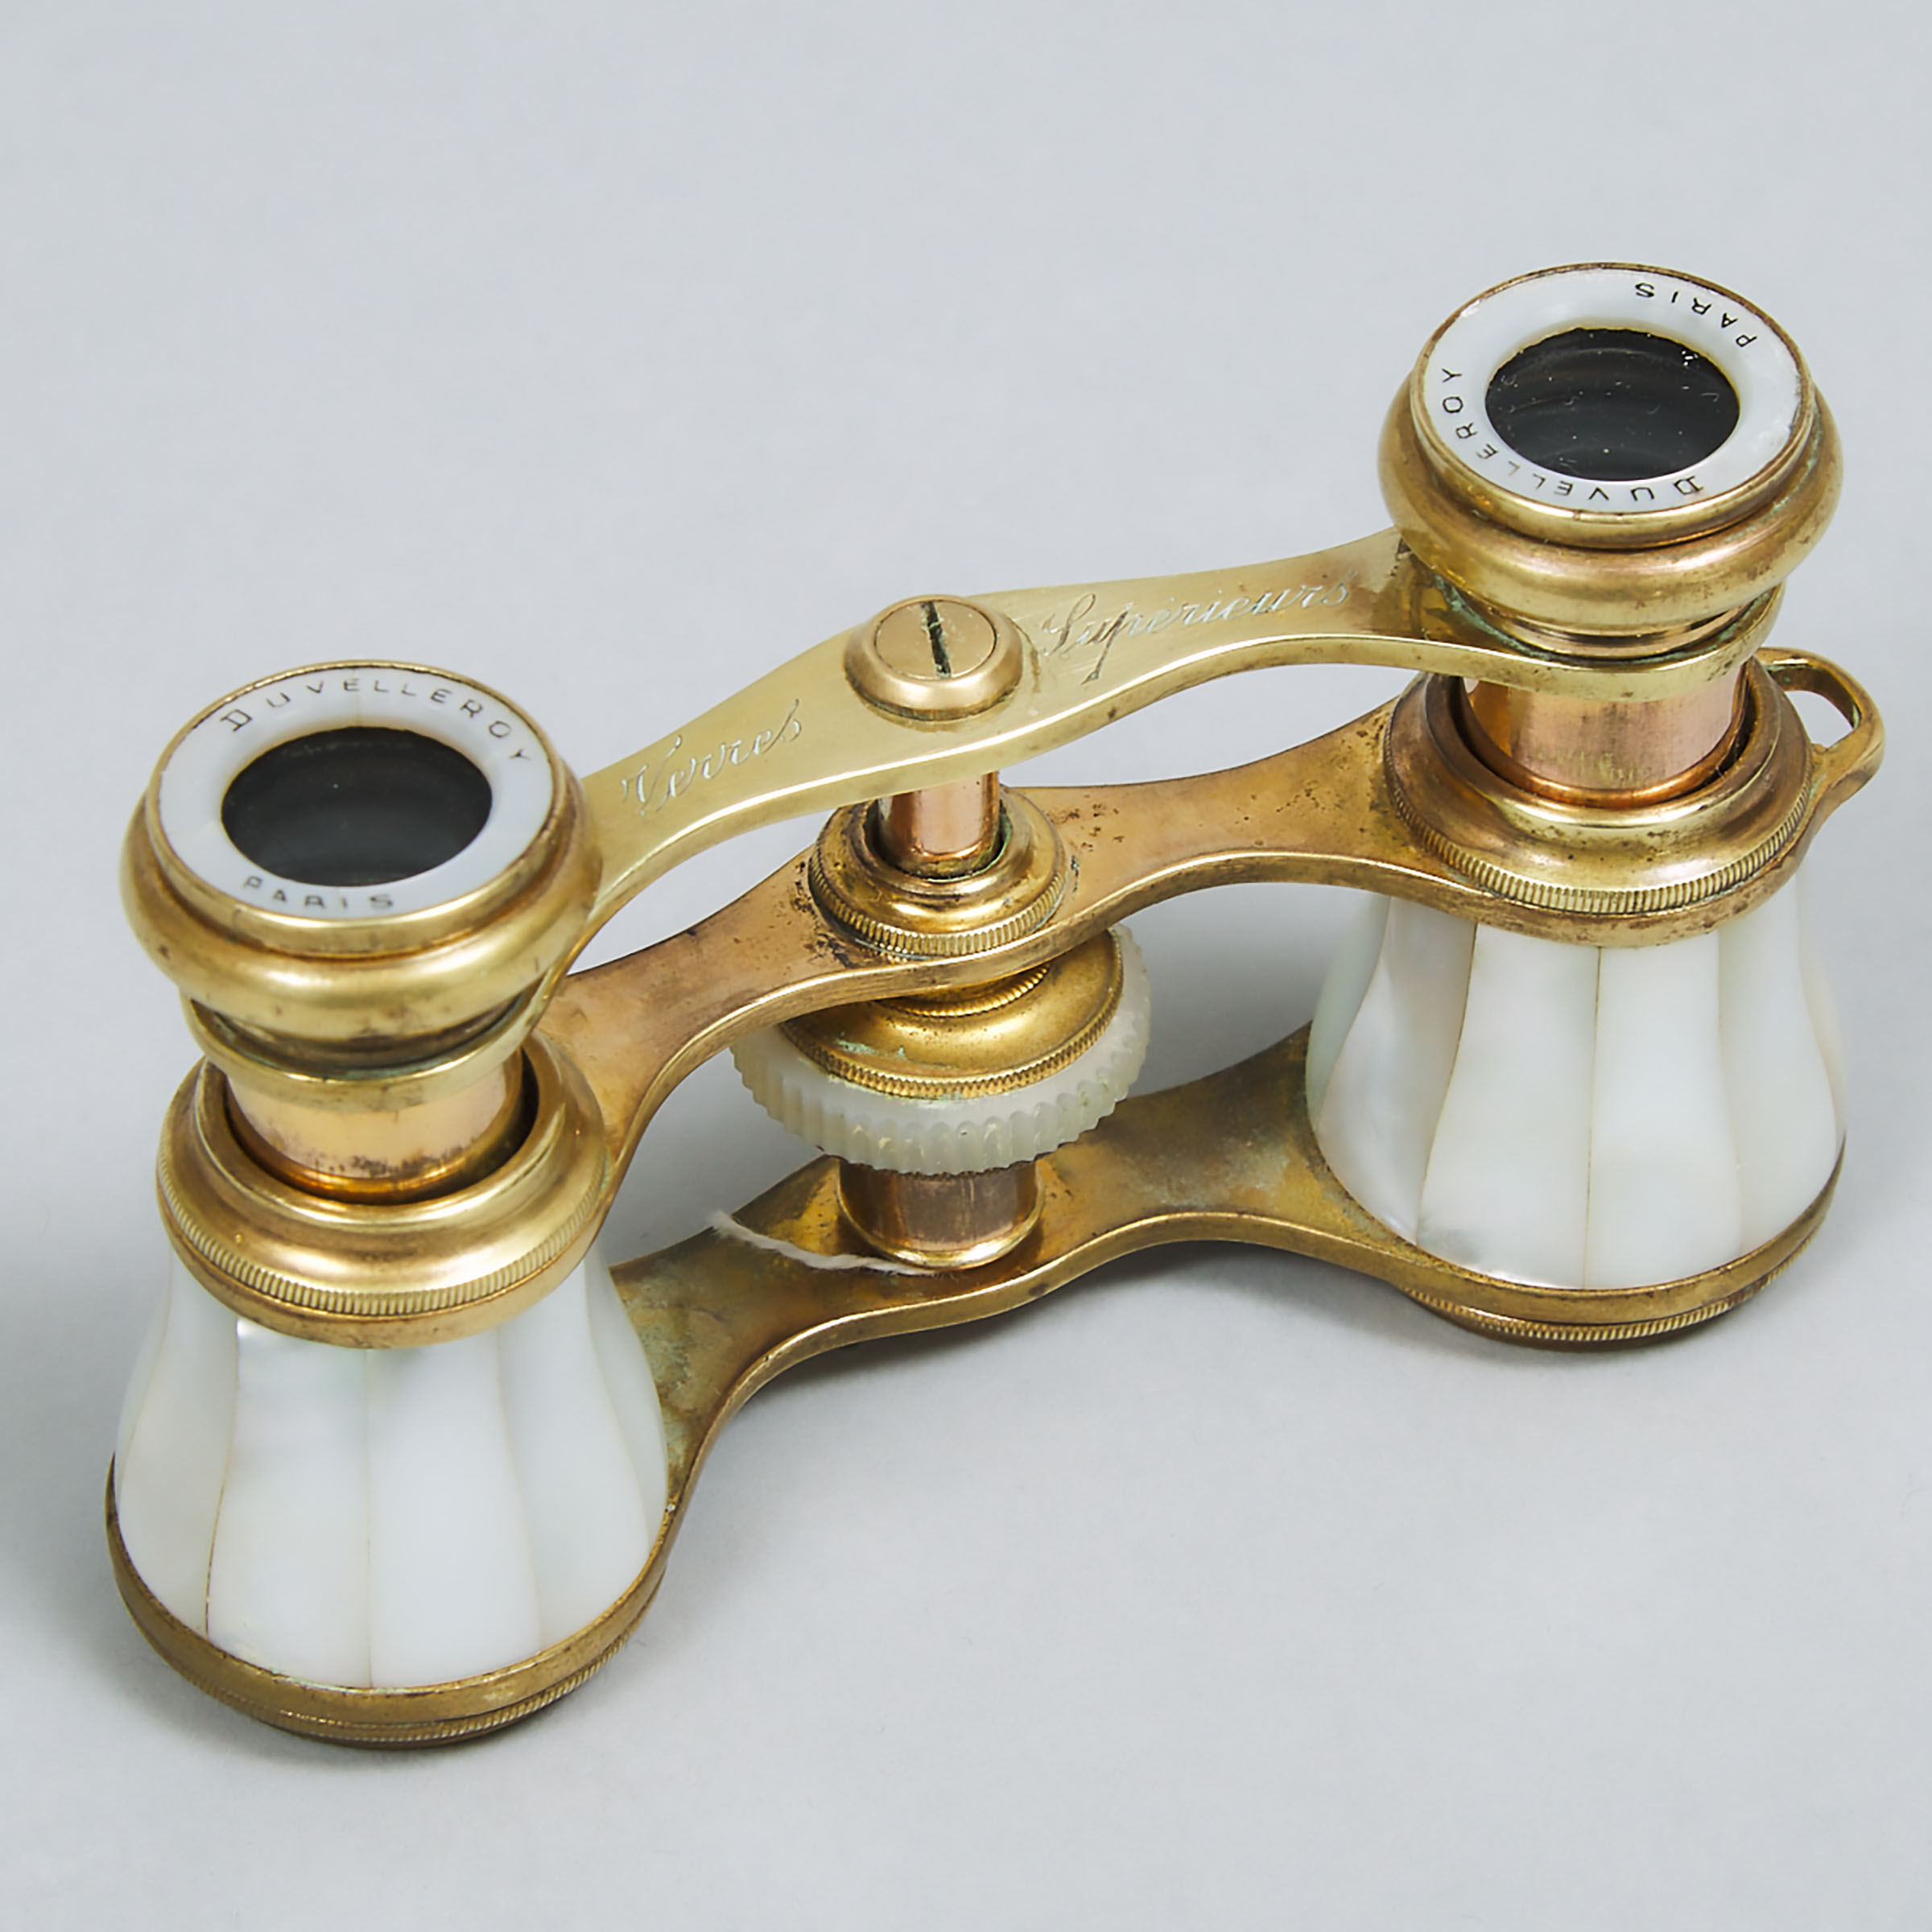 Pair of French Opera Glasses, Duvelleroy, Paris, 19th/early 20th century